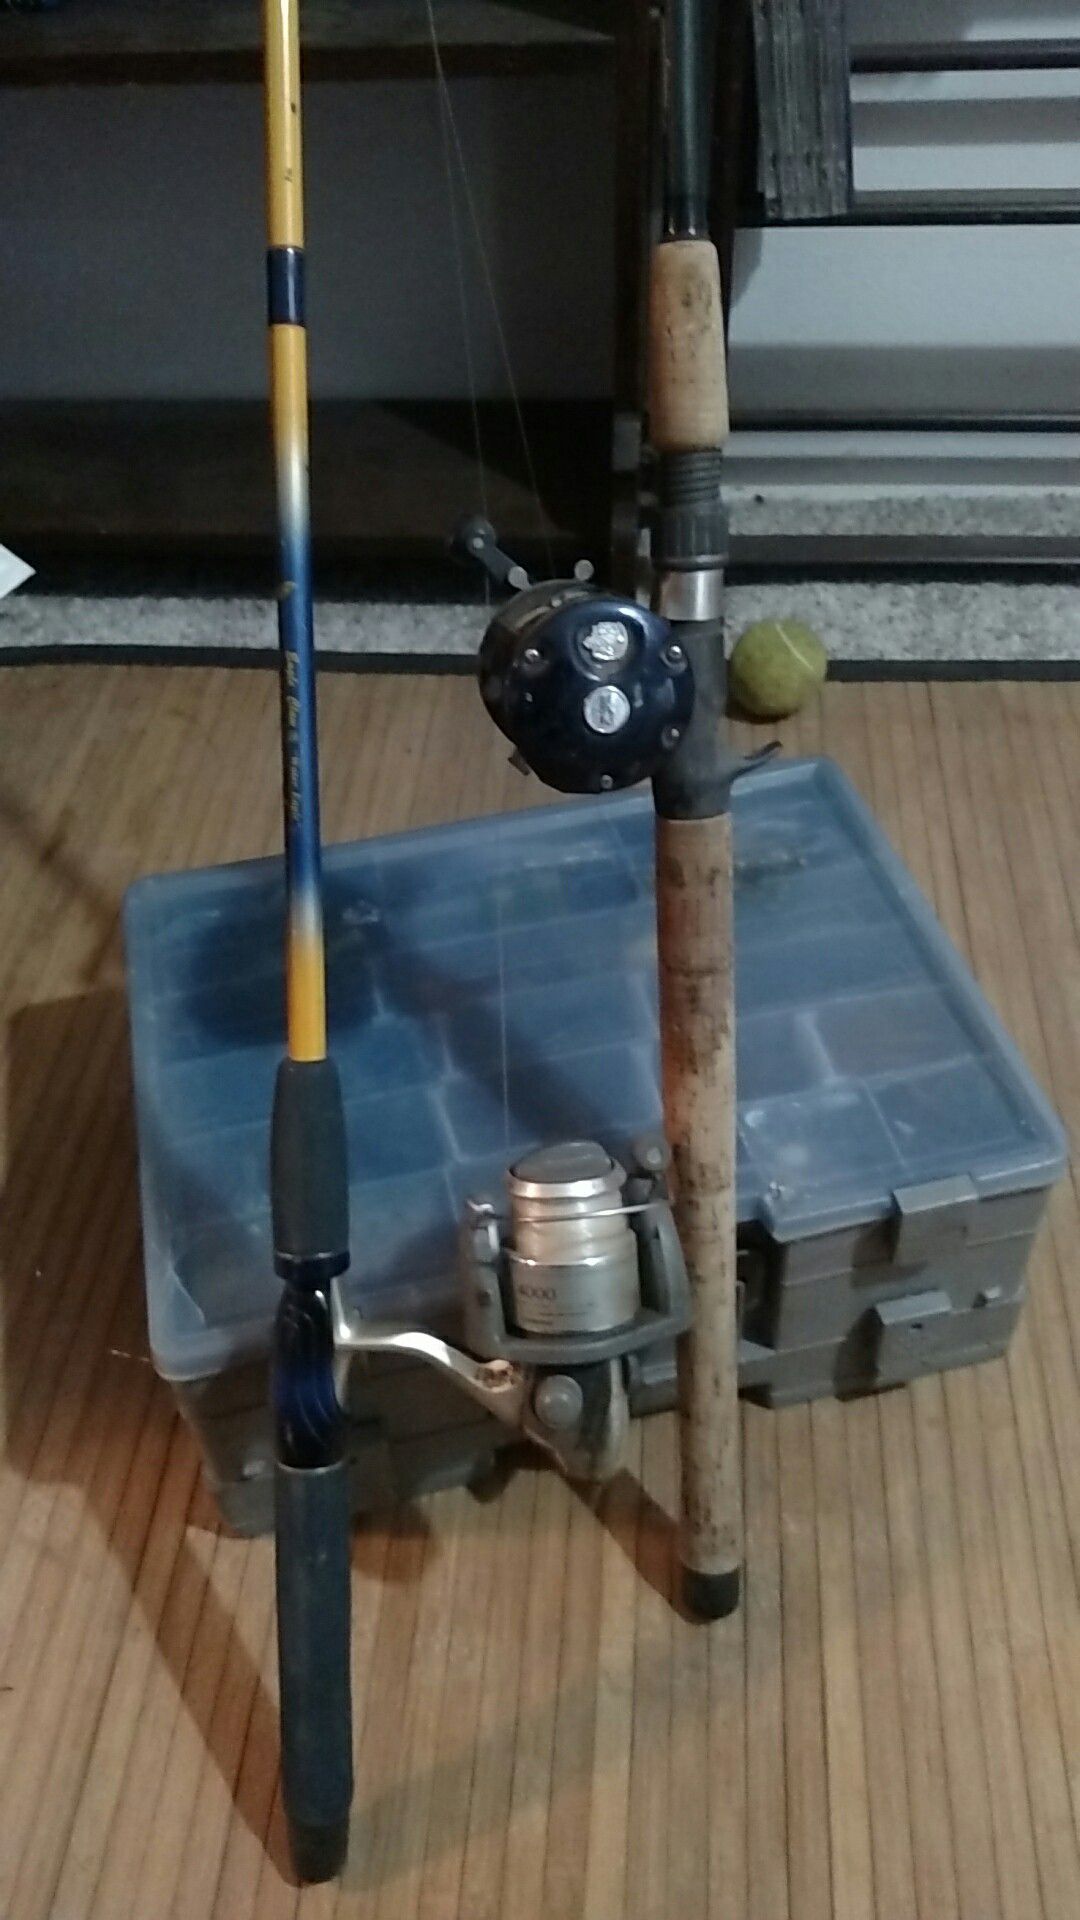 2 fishing polls and a bunch of tackle